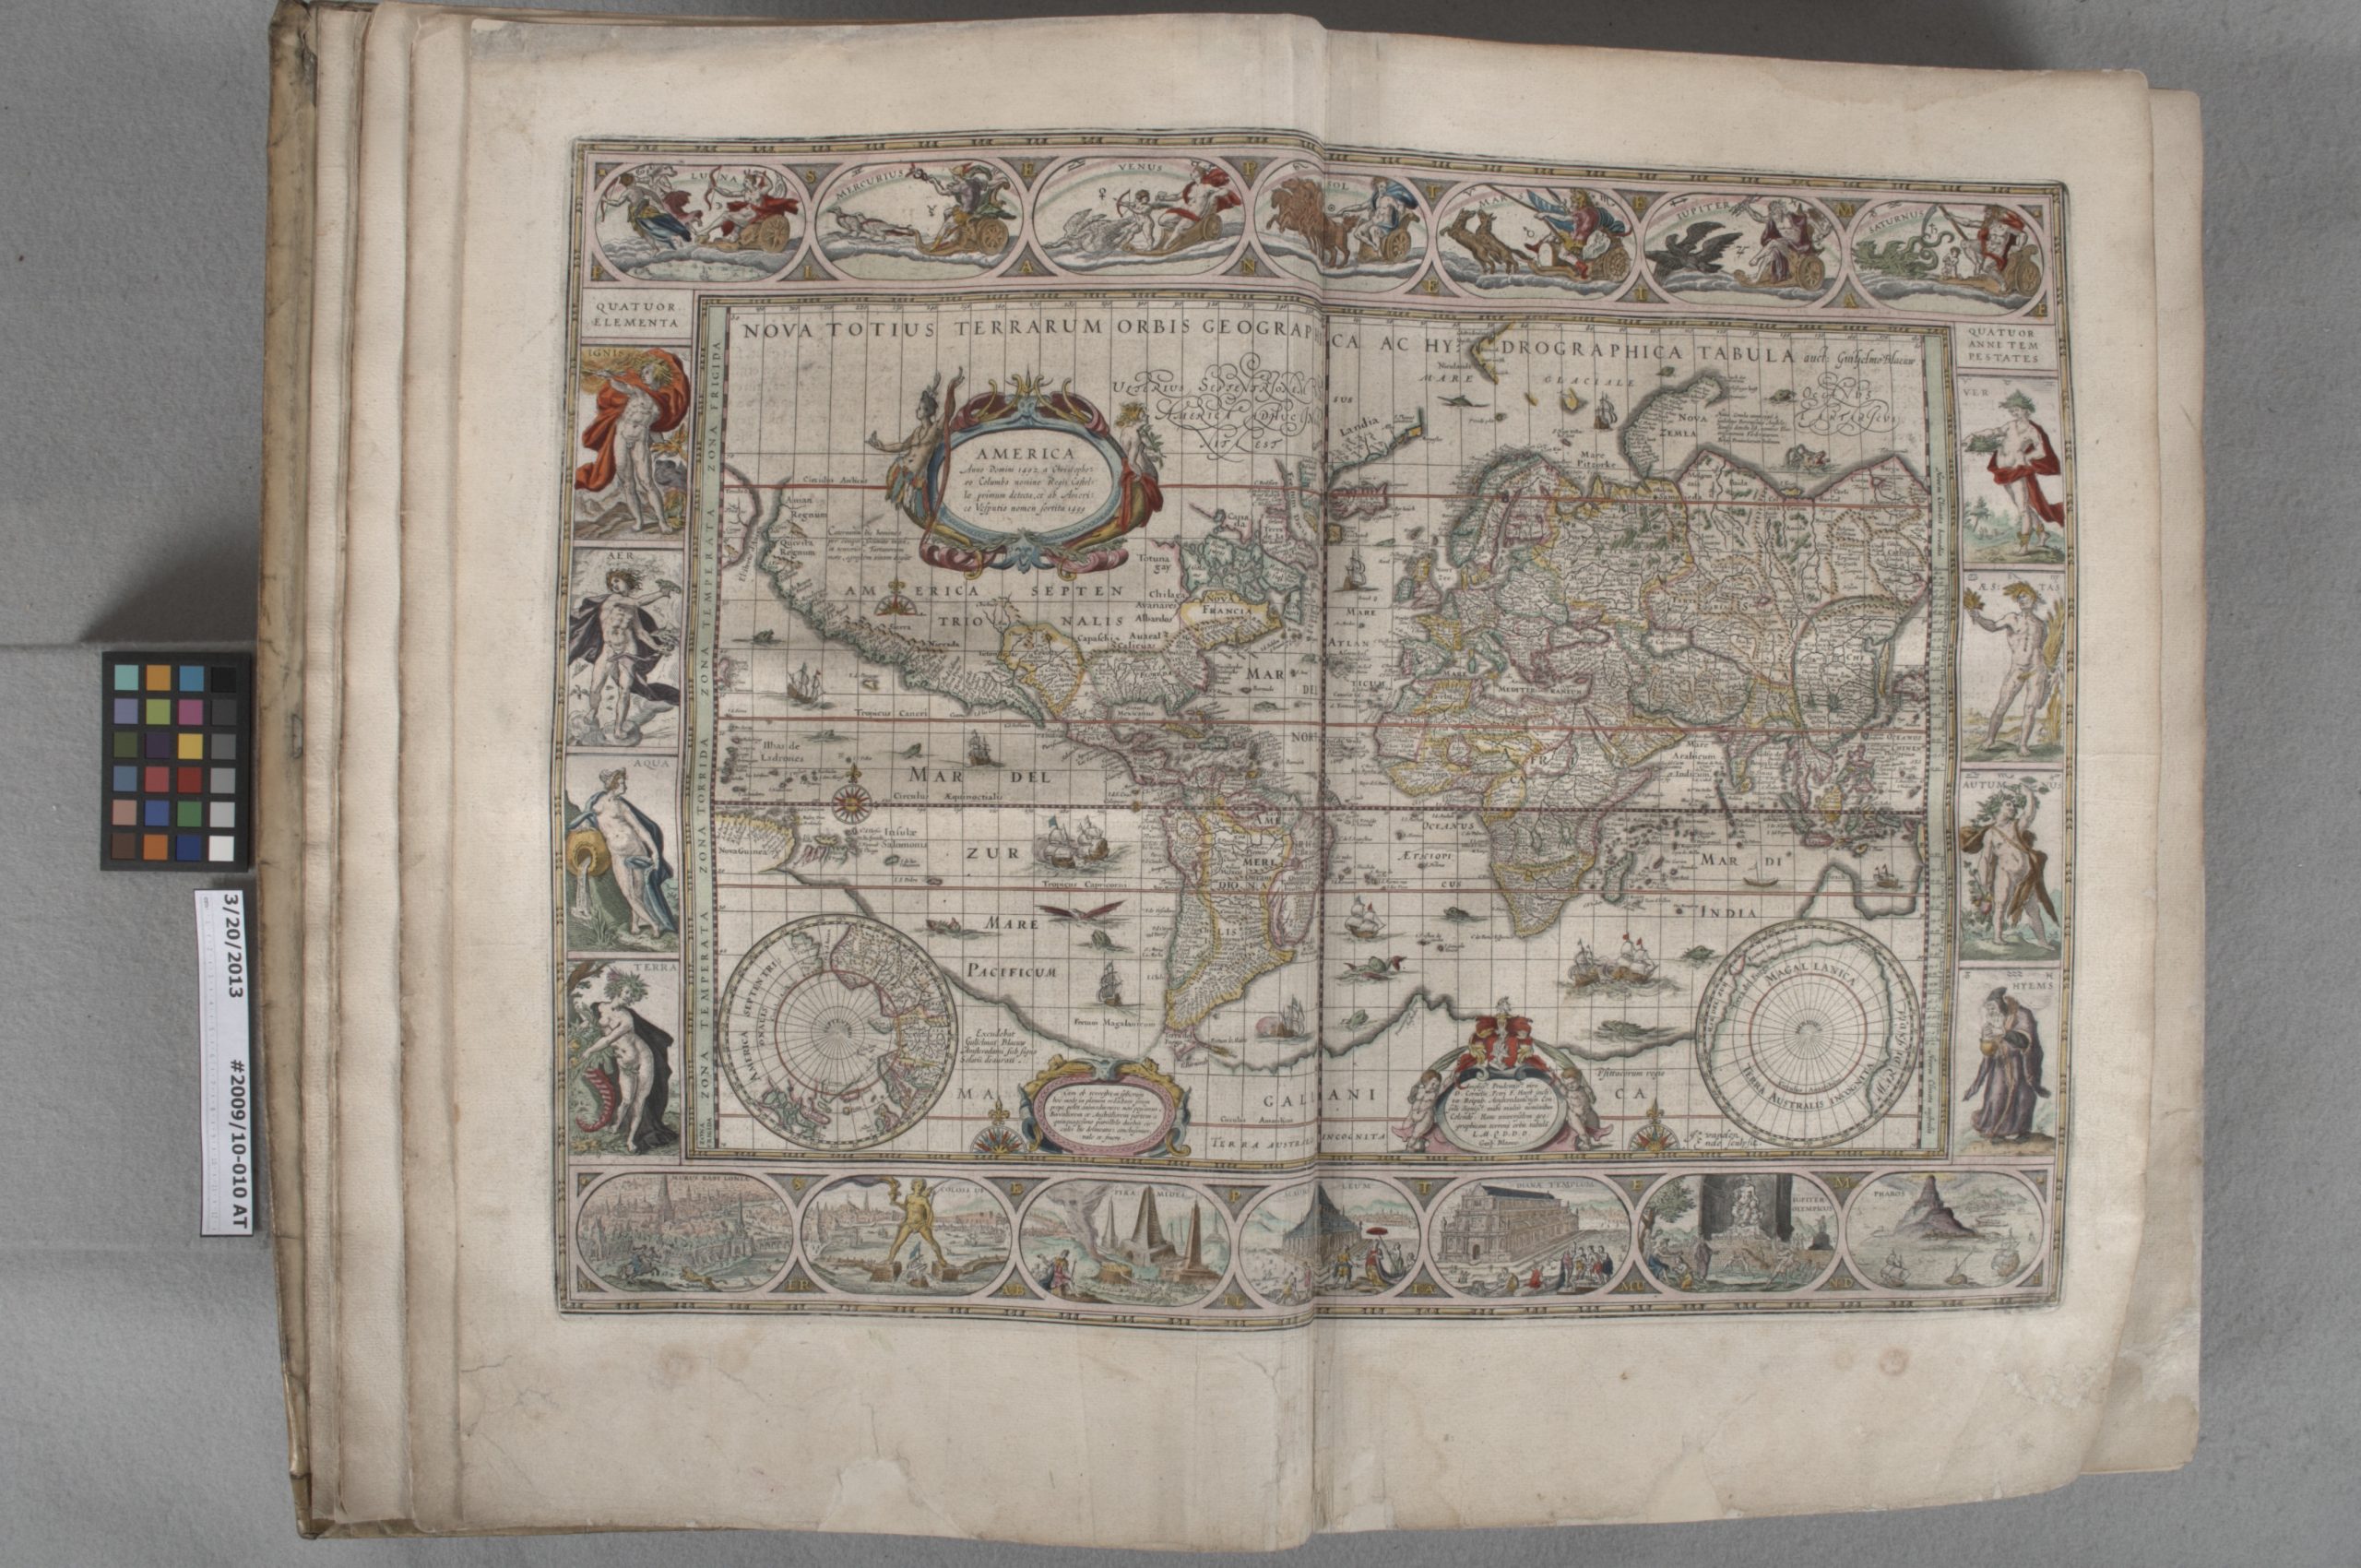 Elaborate printed map showing an early depiction of North and South America